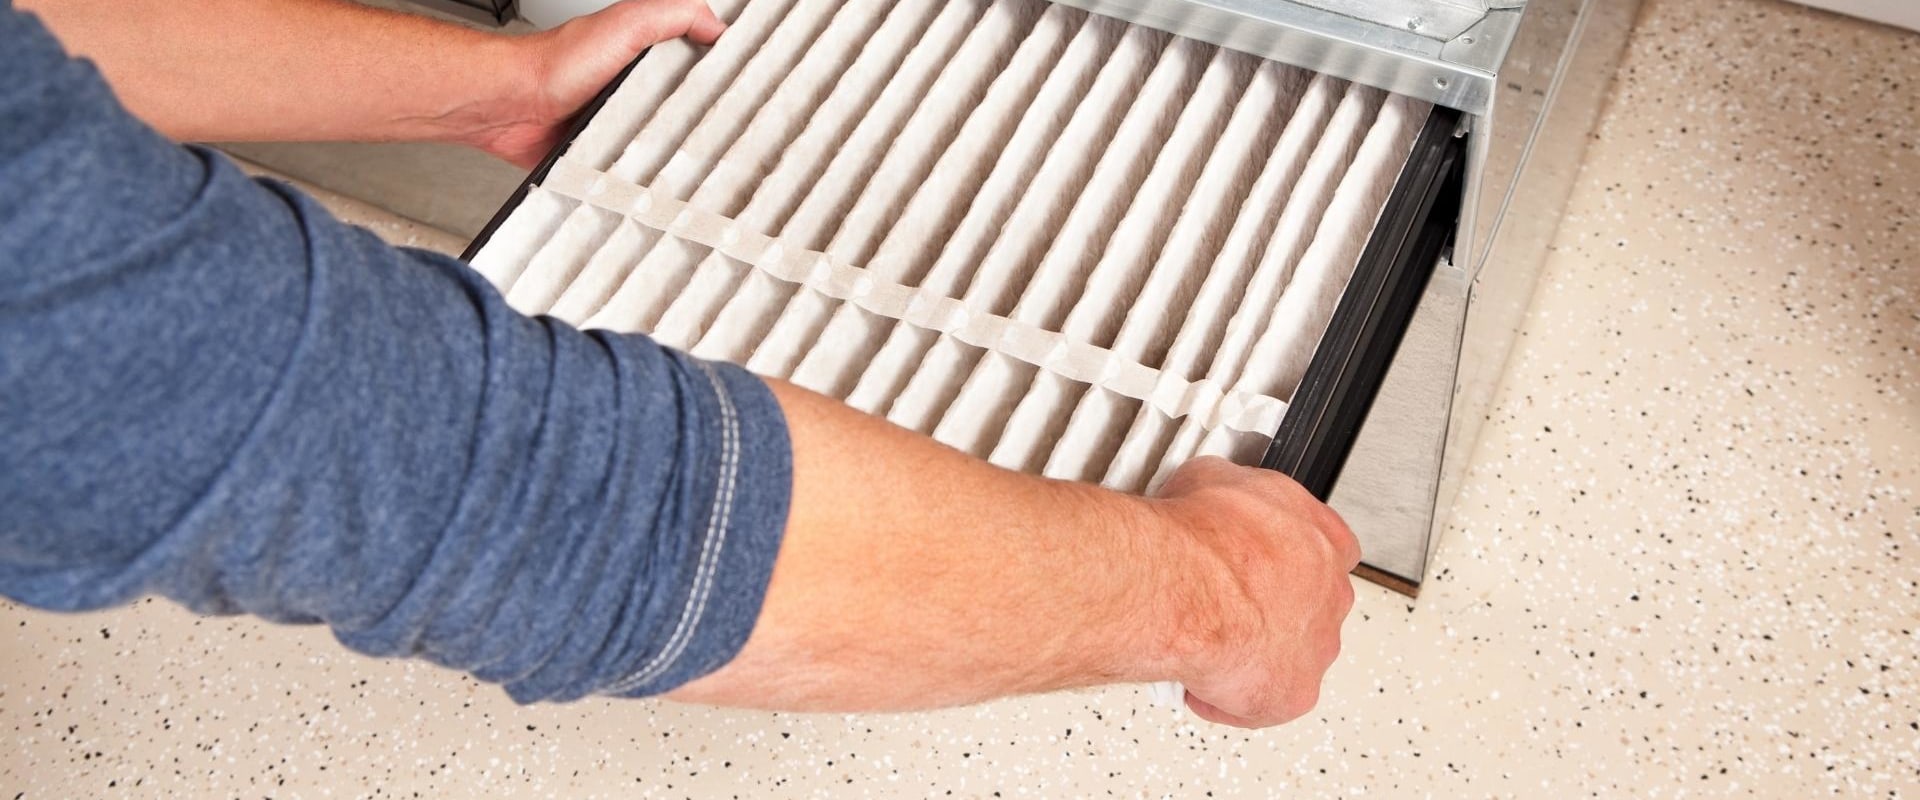 Optimizing Your Air Quality With Standard Air Filter Sizes for Home